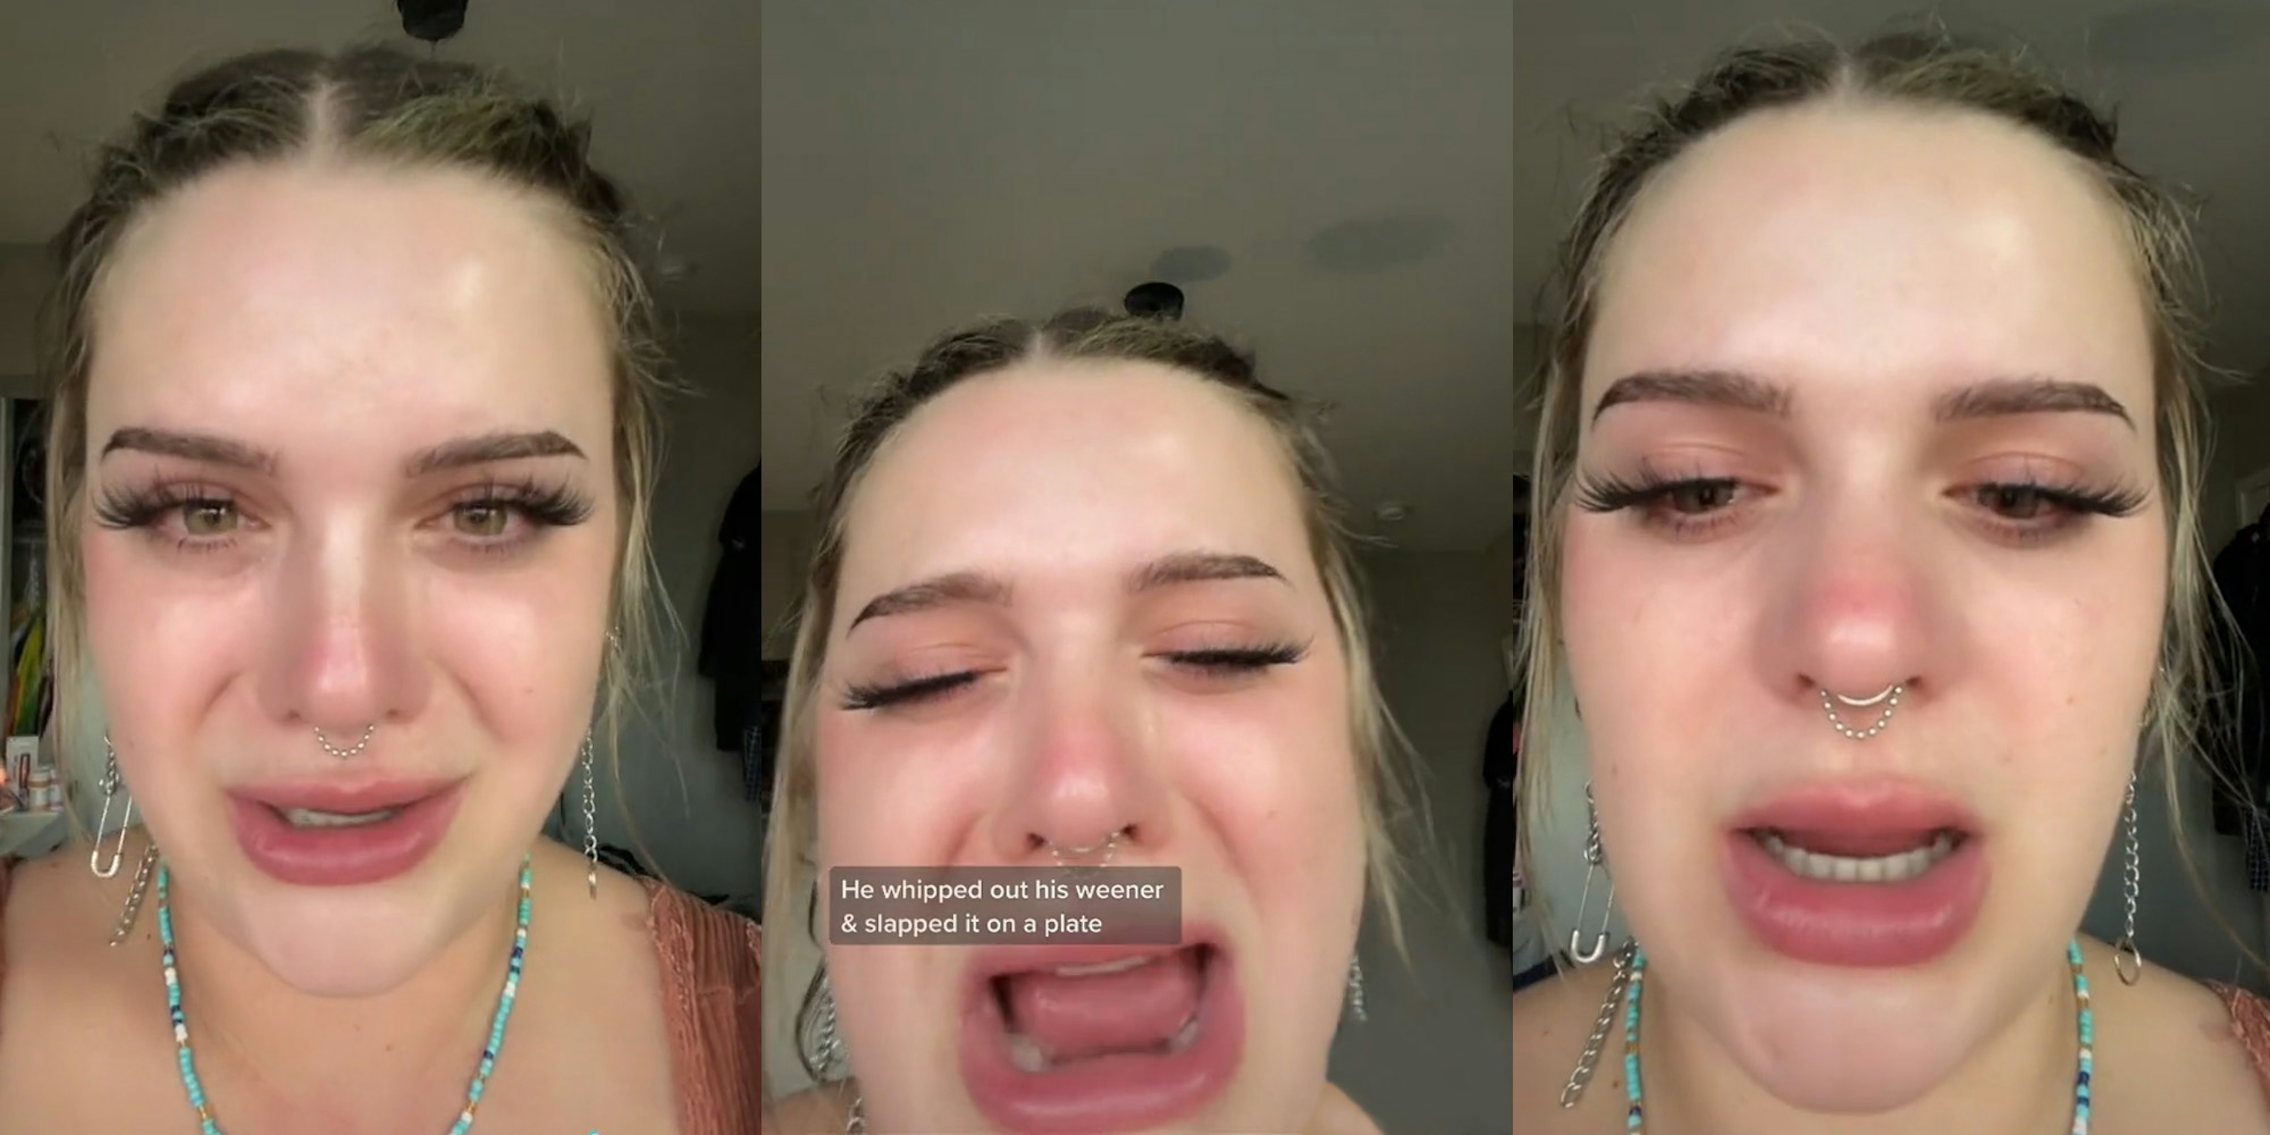 Woman crying talking (l) Woman mouth open huge crying upset caption 'He whipped out his weener & slapped it on a plate' (c) Woman crying talking (r)